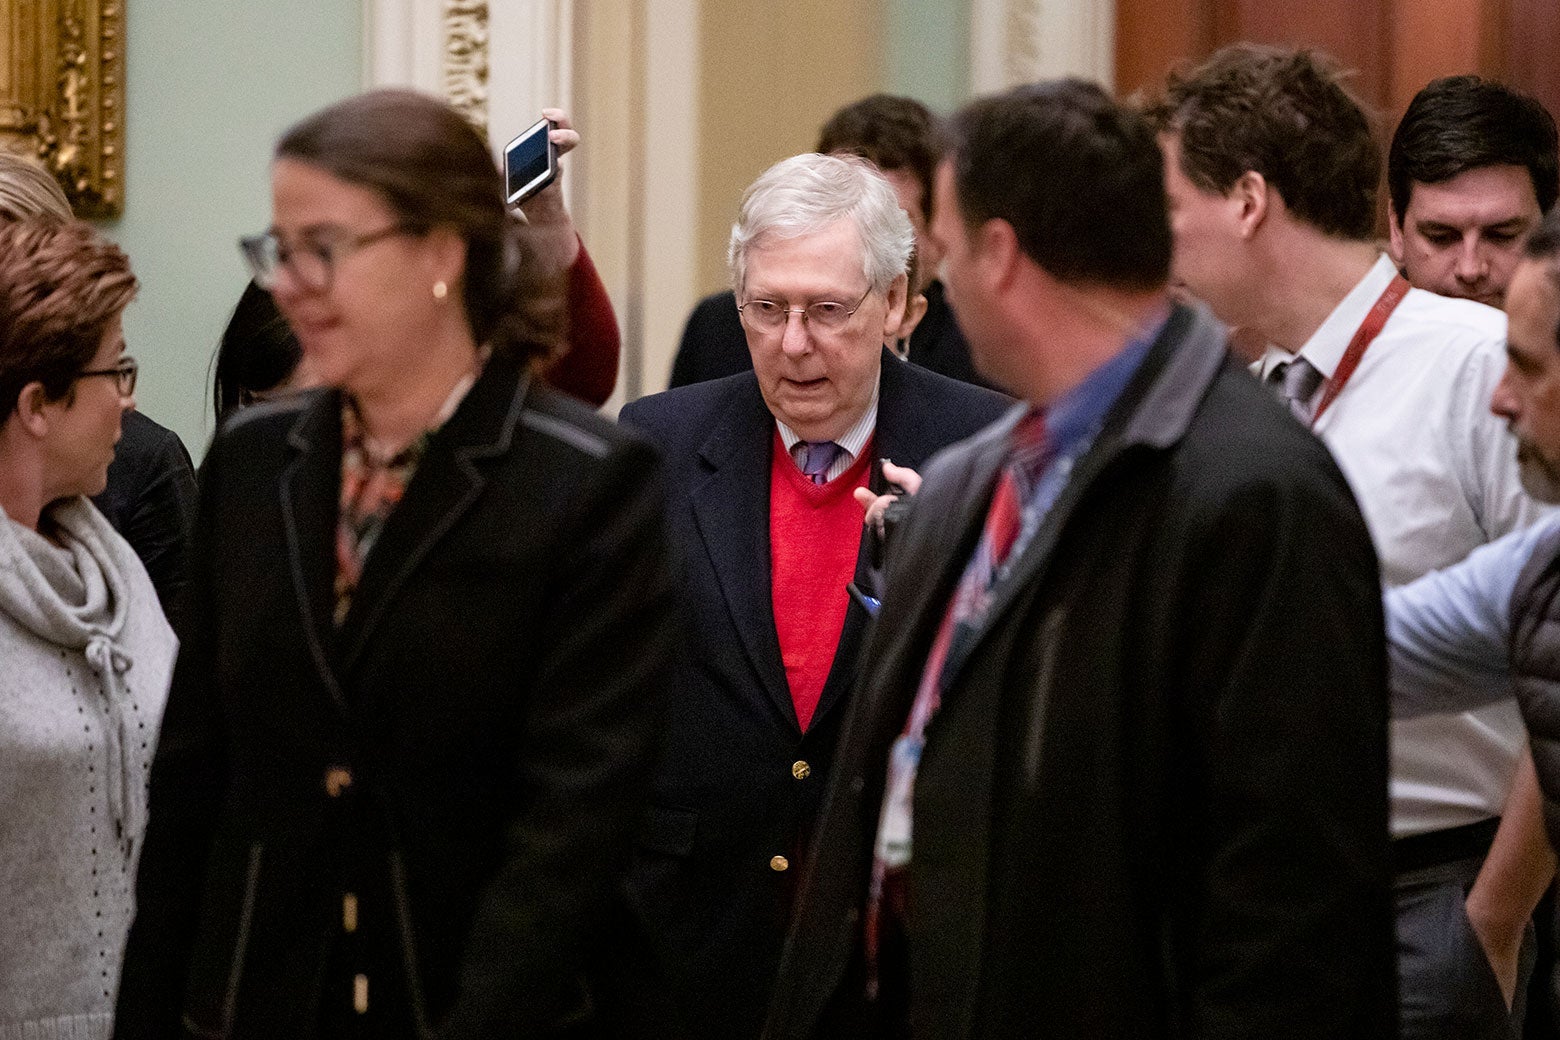 Senate Majority Leader Mitch McConnell is flanked by reporters holding out smartphones and asking him questions.